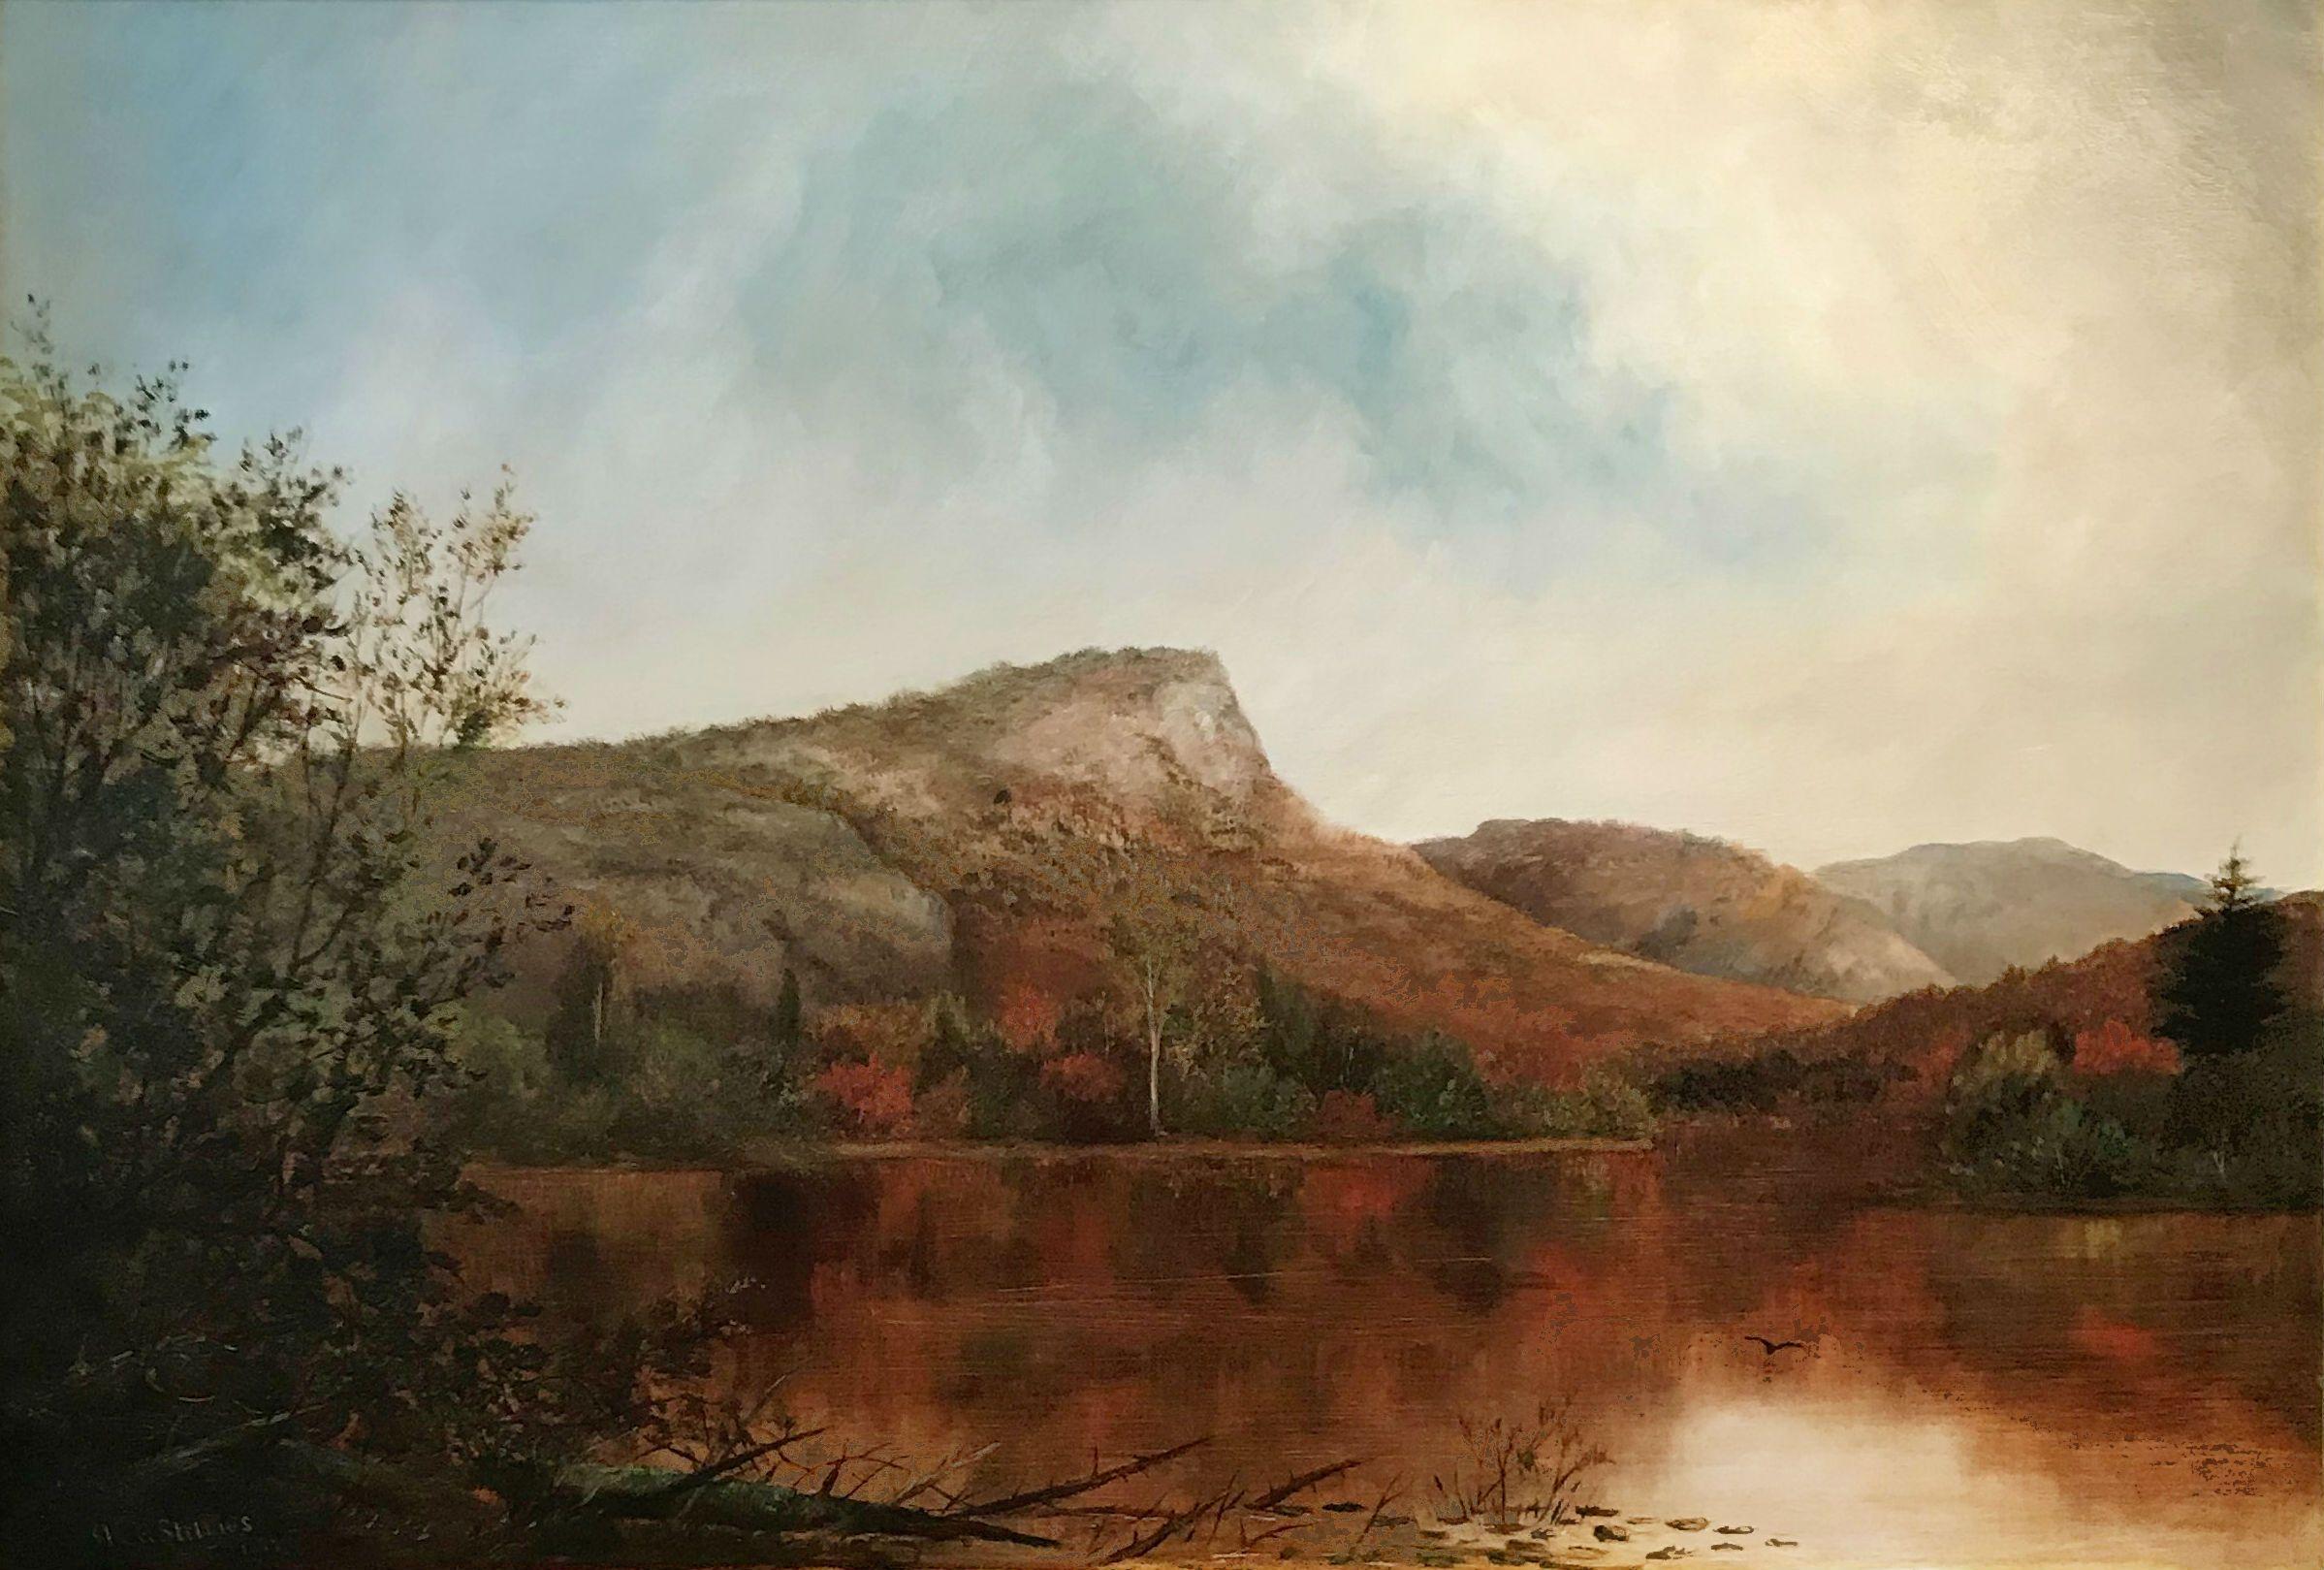 Ida H. Stebbins (b. 1851)
View of South Pond, New York 1879
Oil on canvas
23 x 33 ½ inches
Signed and dated, lower left 

Ida H. Stebbins was born in January 1851 in Chelsea, Massachusetts to Mary and Isaac Stebbins, a teacher. Though scant records